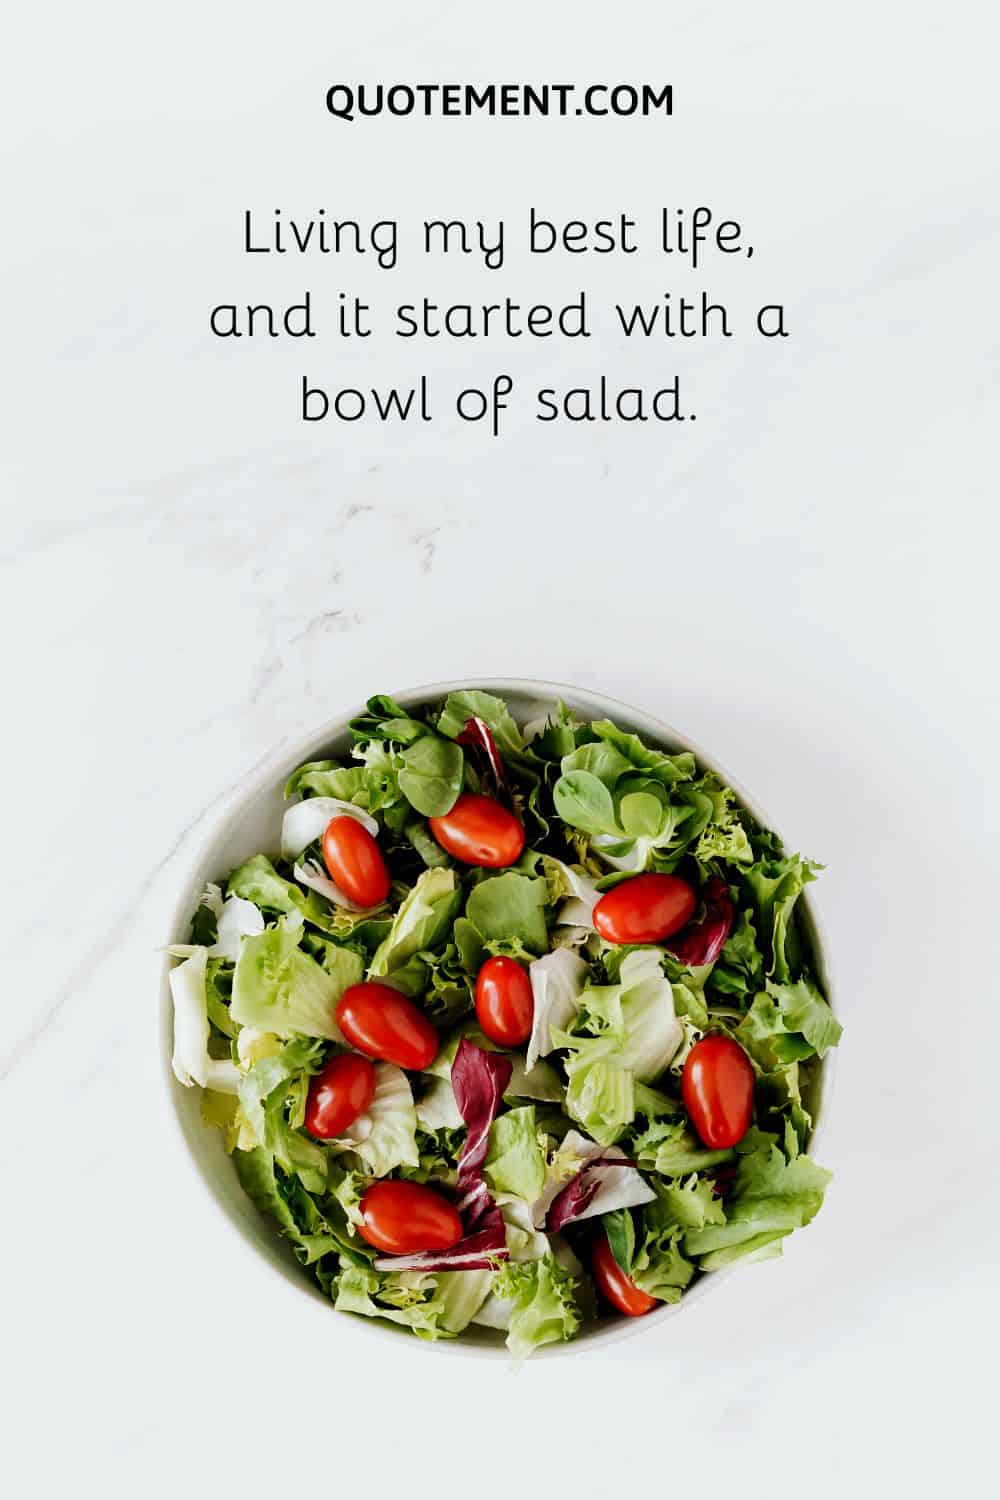 it started with a bowl of salad